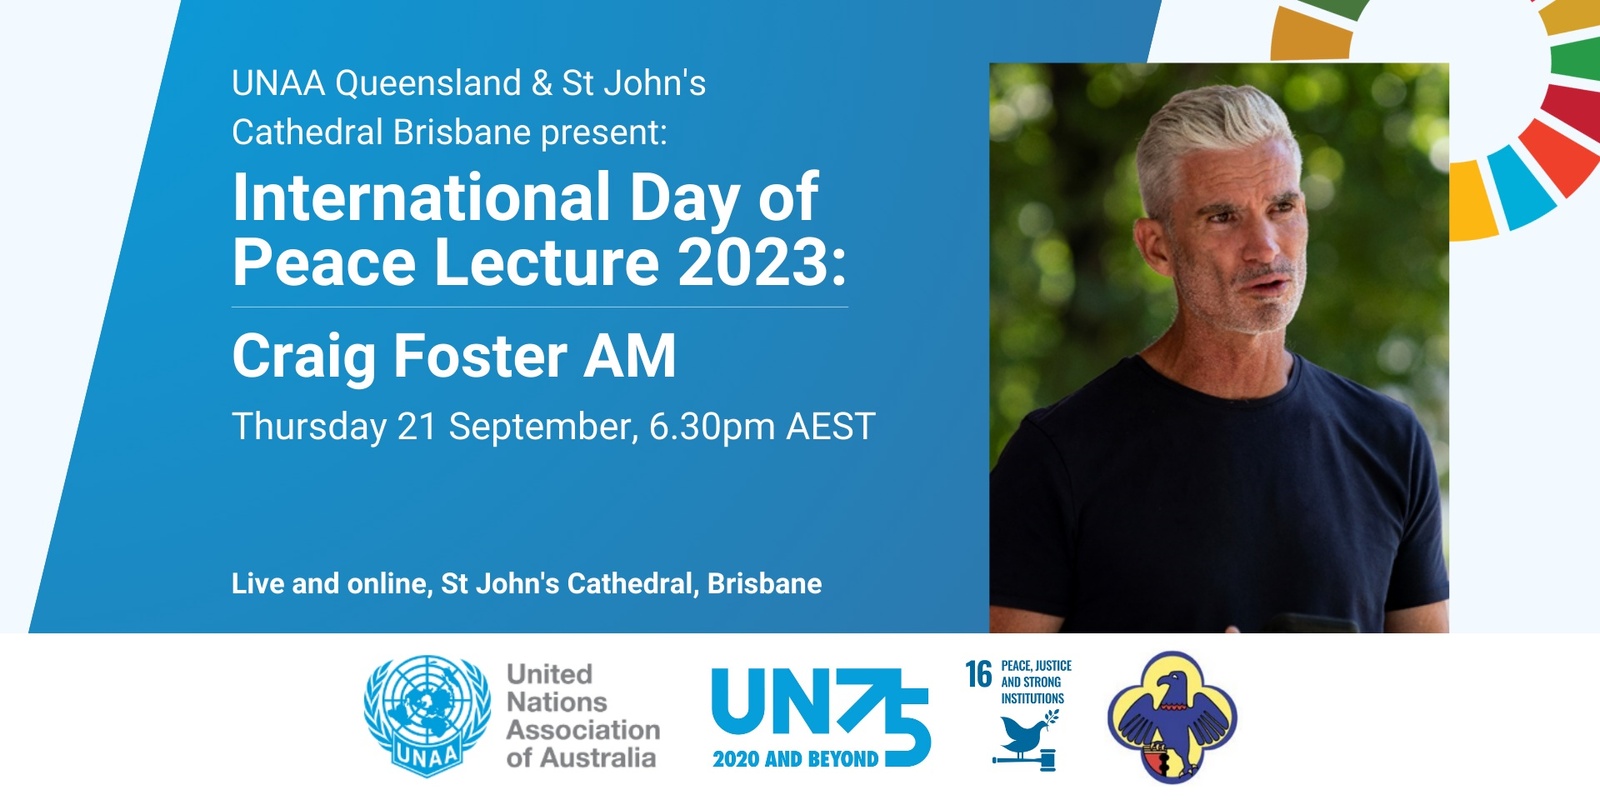 Banner image for UNAAQ International Day of Peace Lecture 2023: Craig Foster AM 